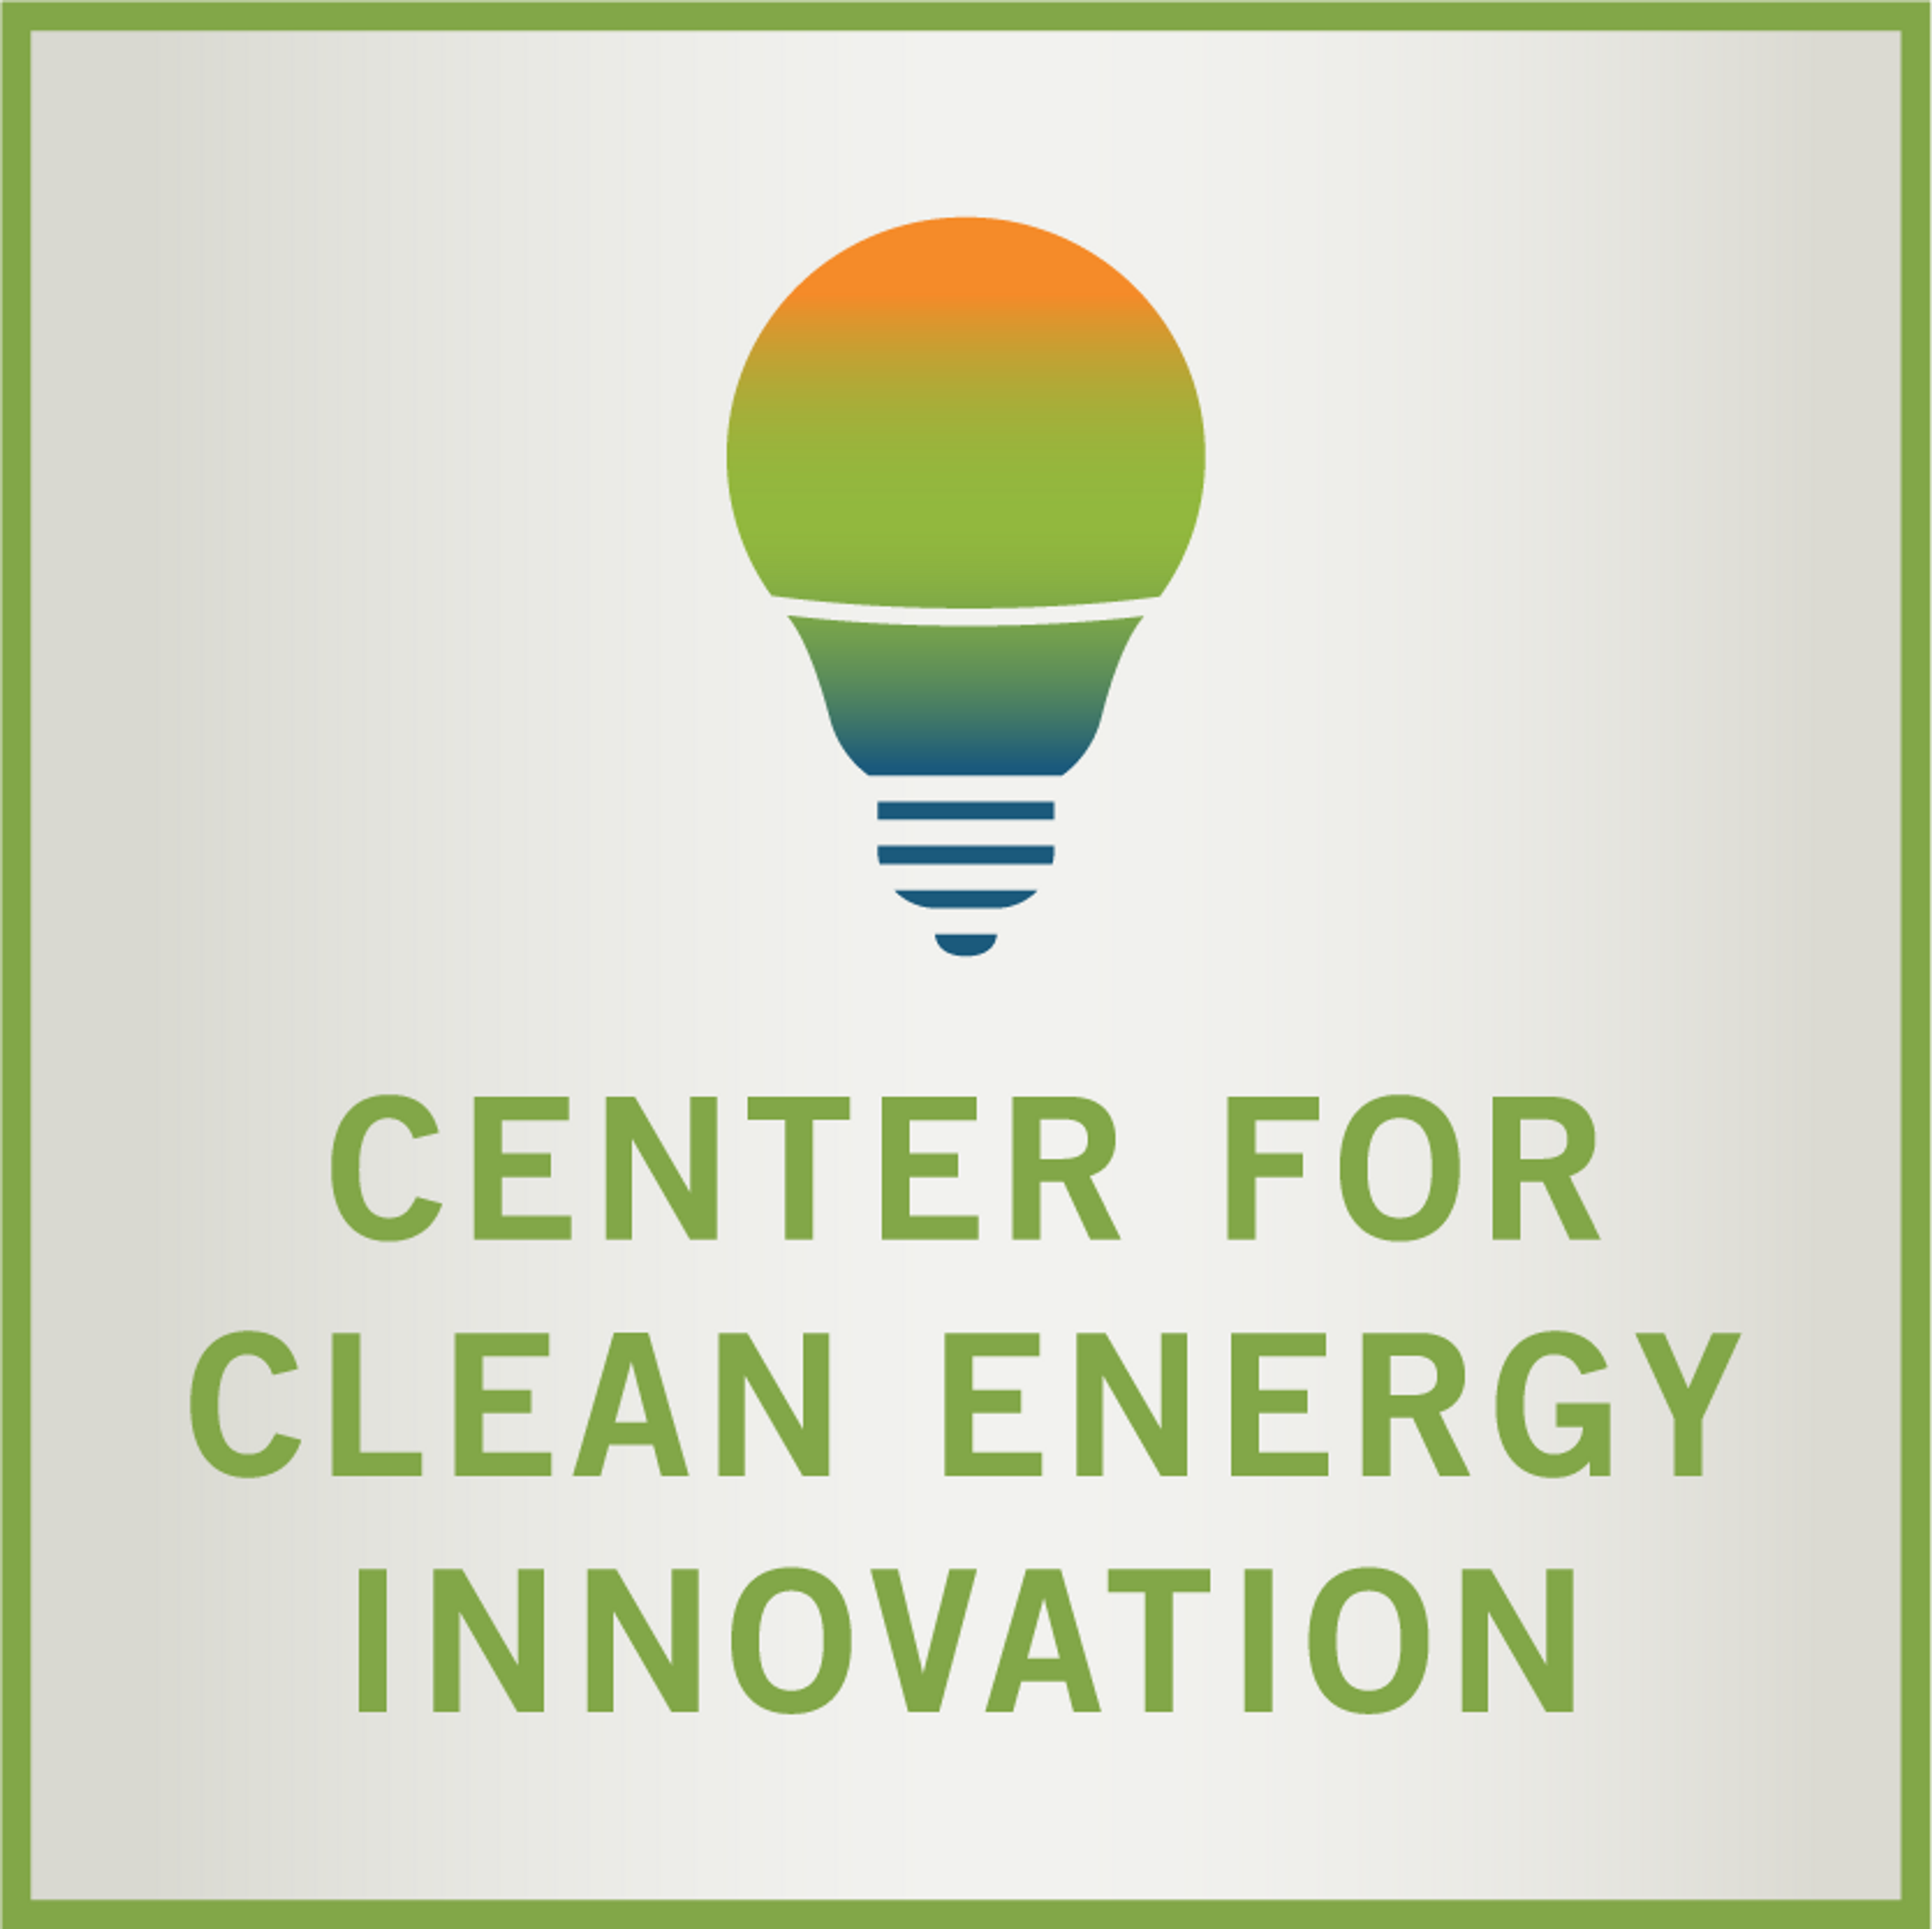 Building Back Cleaner With Industrial Decarbonization Demonstration Projects